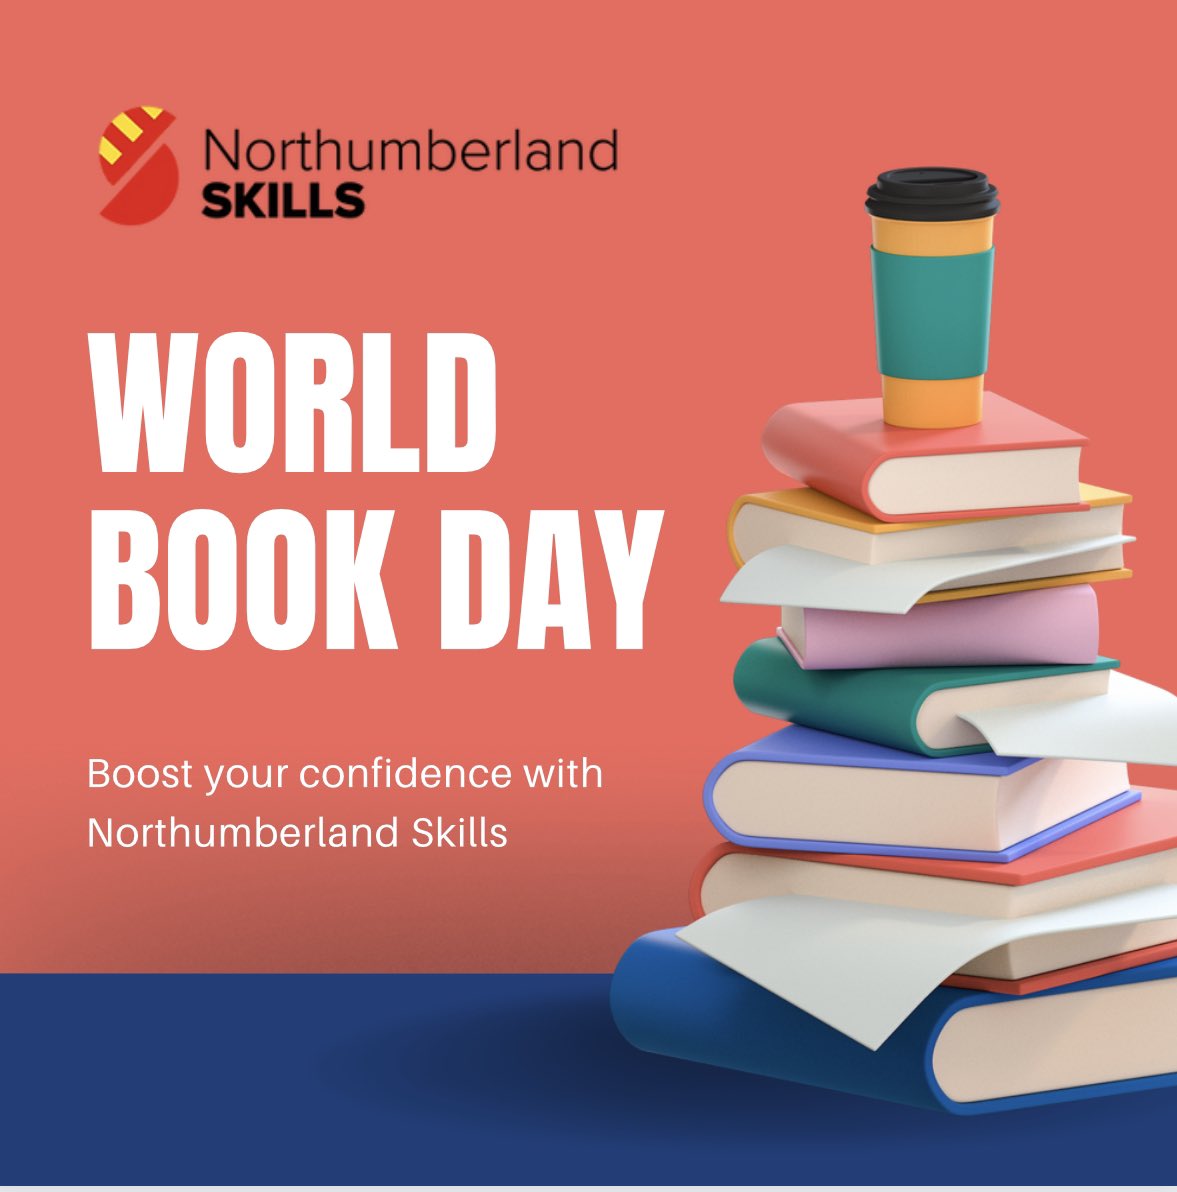 Happy #WorldBookDay! We have a wide range of courses designed to boost your confidence and skills, including English and other functional skills programmes.

Email learn@northumberland.gov.uk or visit northumberlandskills.co.uk for more information
#Northumberland #LearnDiscoverGrow